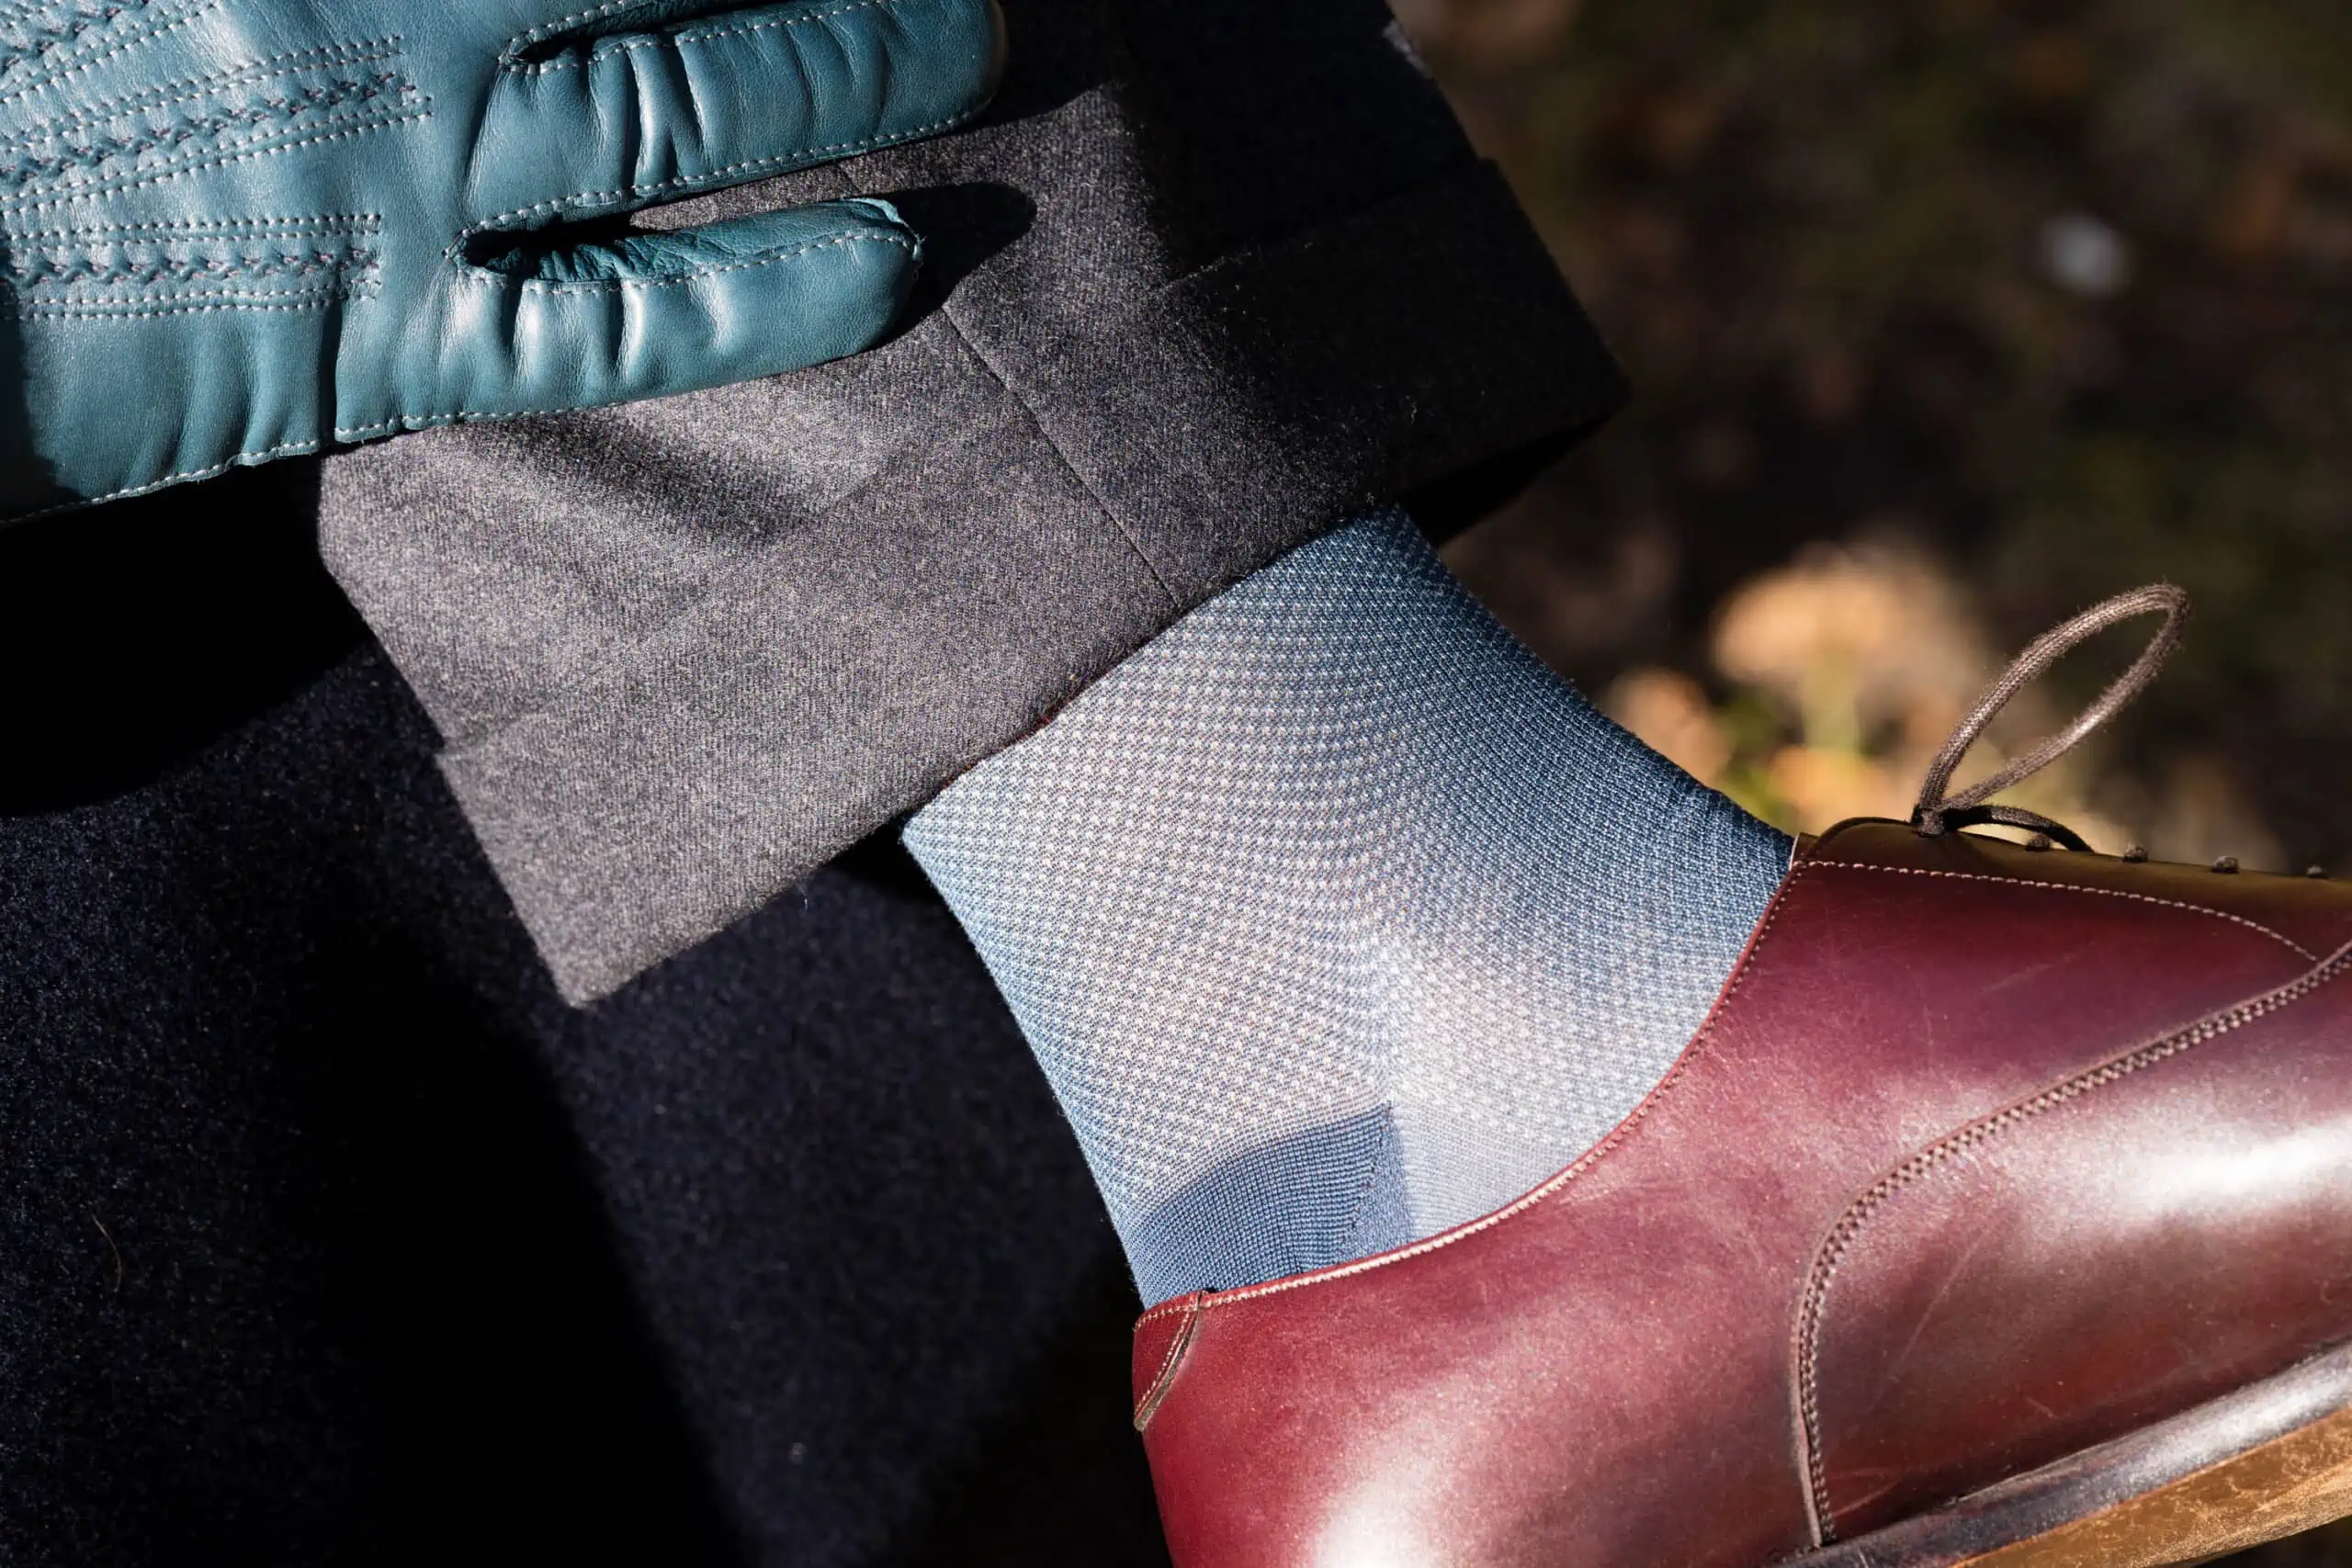 A photograph of oxblood shoes with blue socks and blue gloves